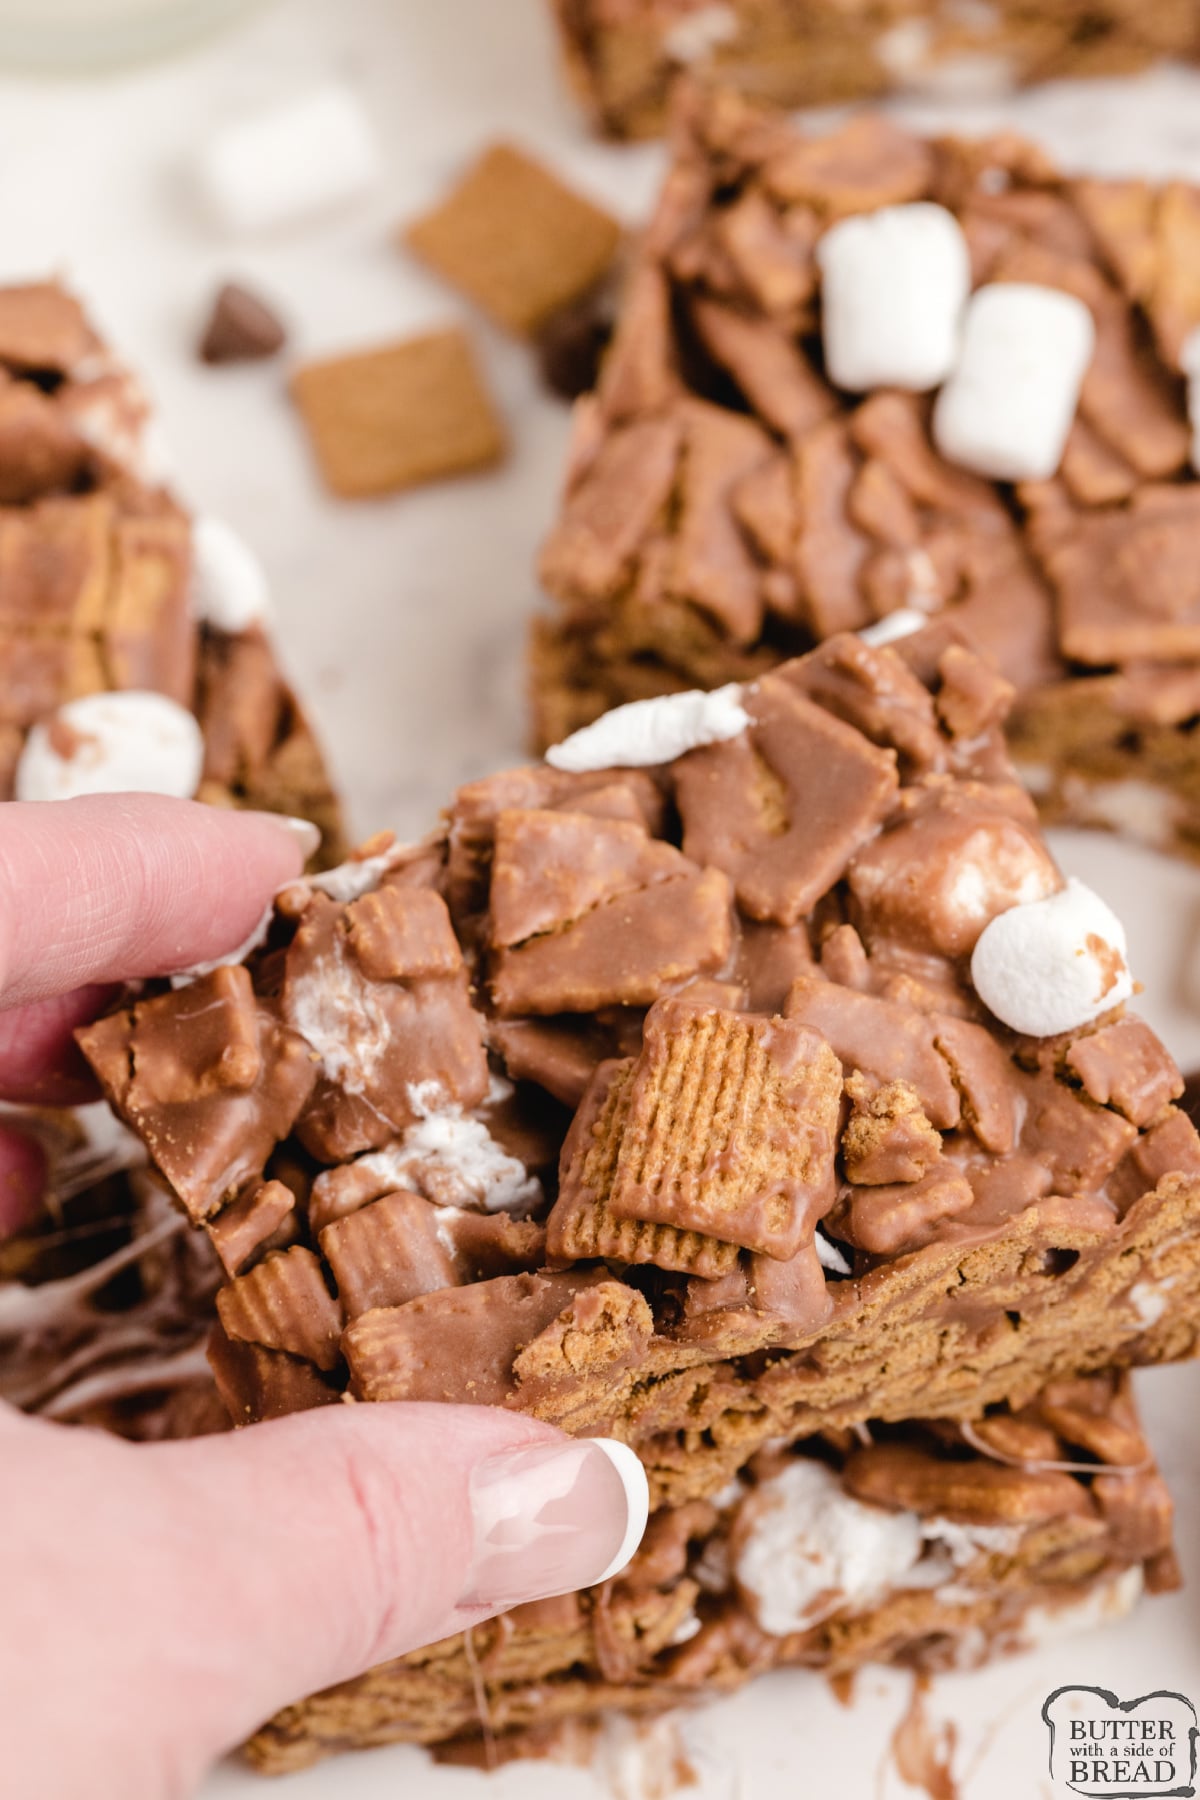 No Bake S'mores Bars are made with Golden Grahams, melted chocolate and marshmallows. This delicious no bake dessert recipe comes together in just a few minutes and tastes just like s'mores, without the mess or the campfire!